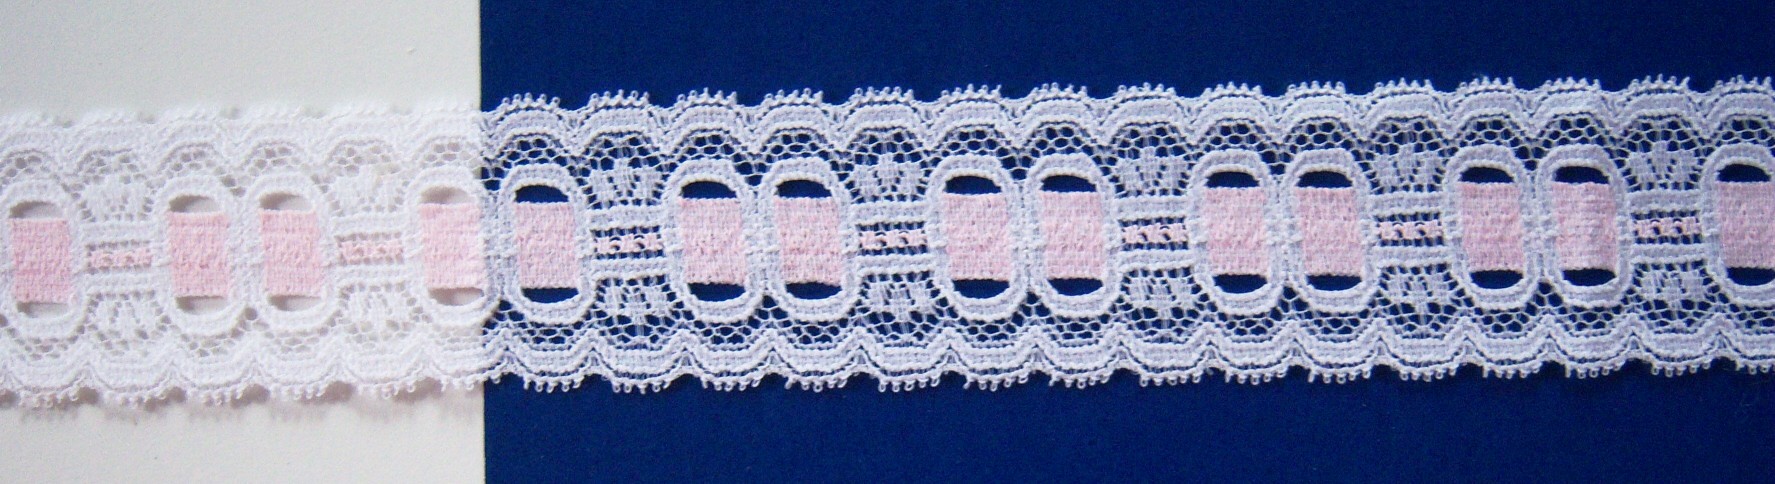 White/Pink Mist 1 3/4" Stretch Lace